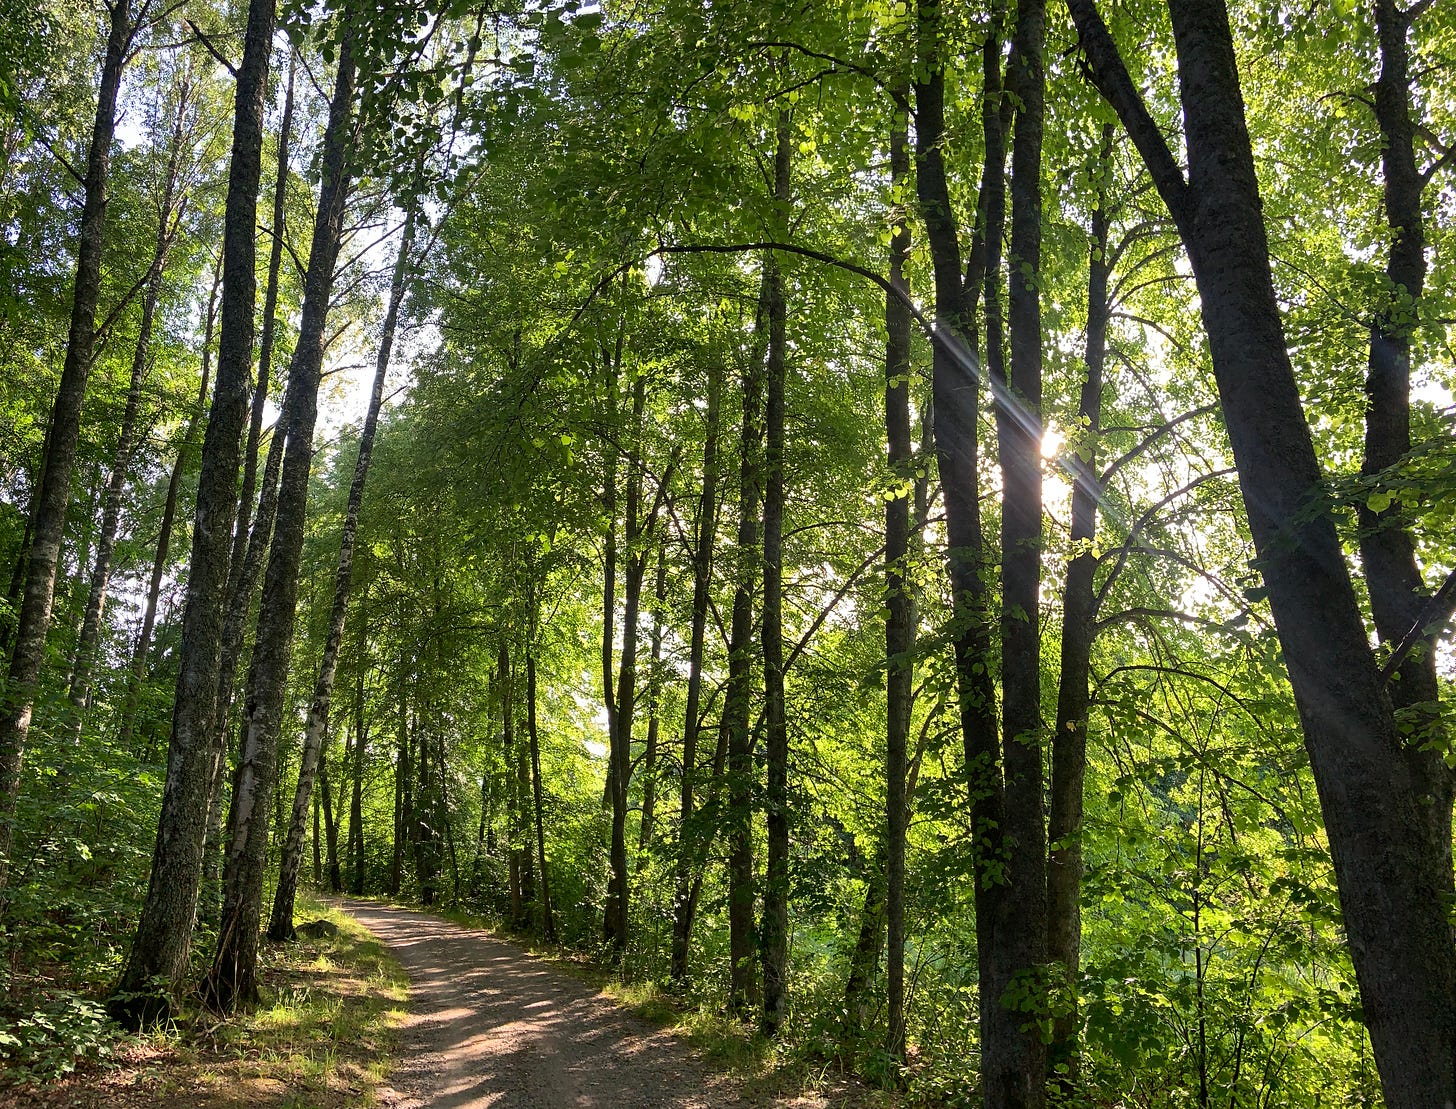 a view of large trees and hiking path at a natural reserve in Uppsala Sweden